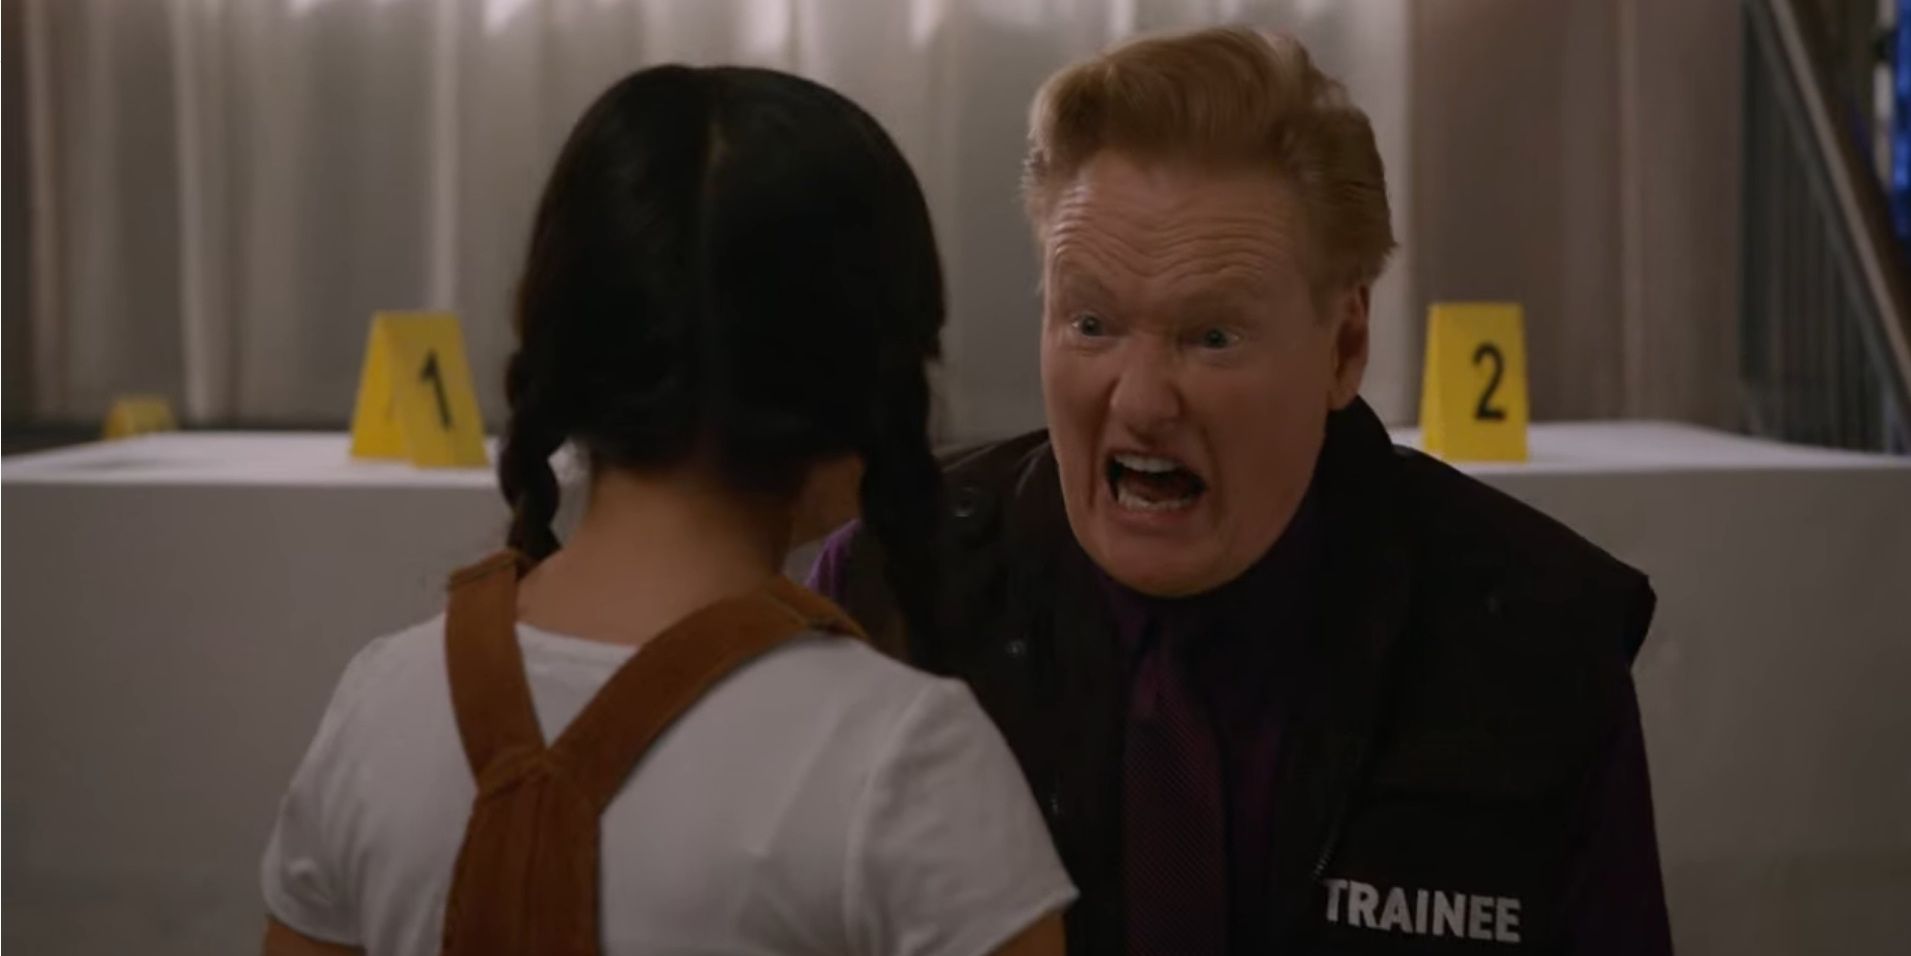 Conan O'Brien makes a scary face at a little girl in Murderville.